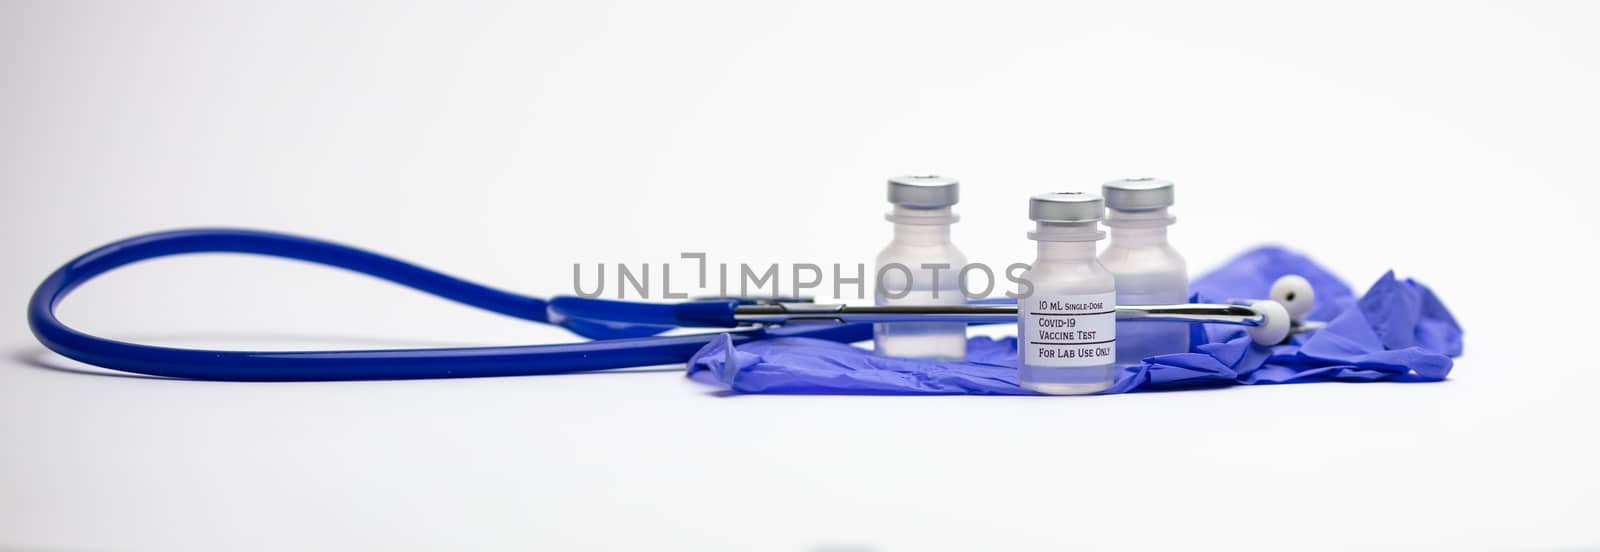 Covid-19 Vaccine Test Vials and Stethoscope by kreativepics